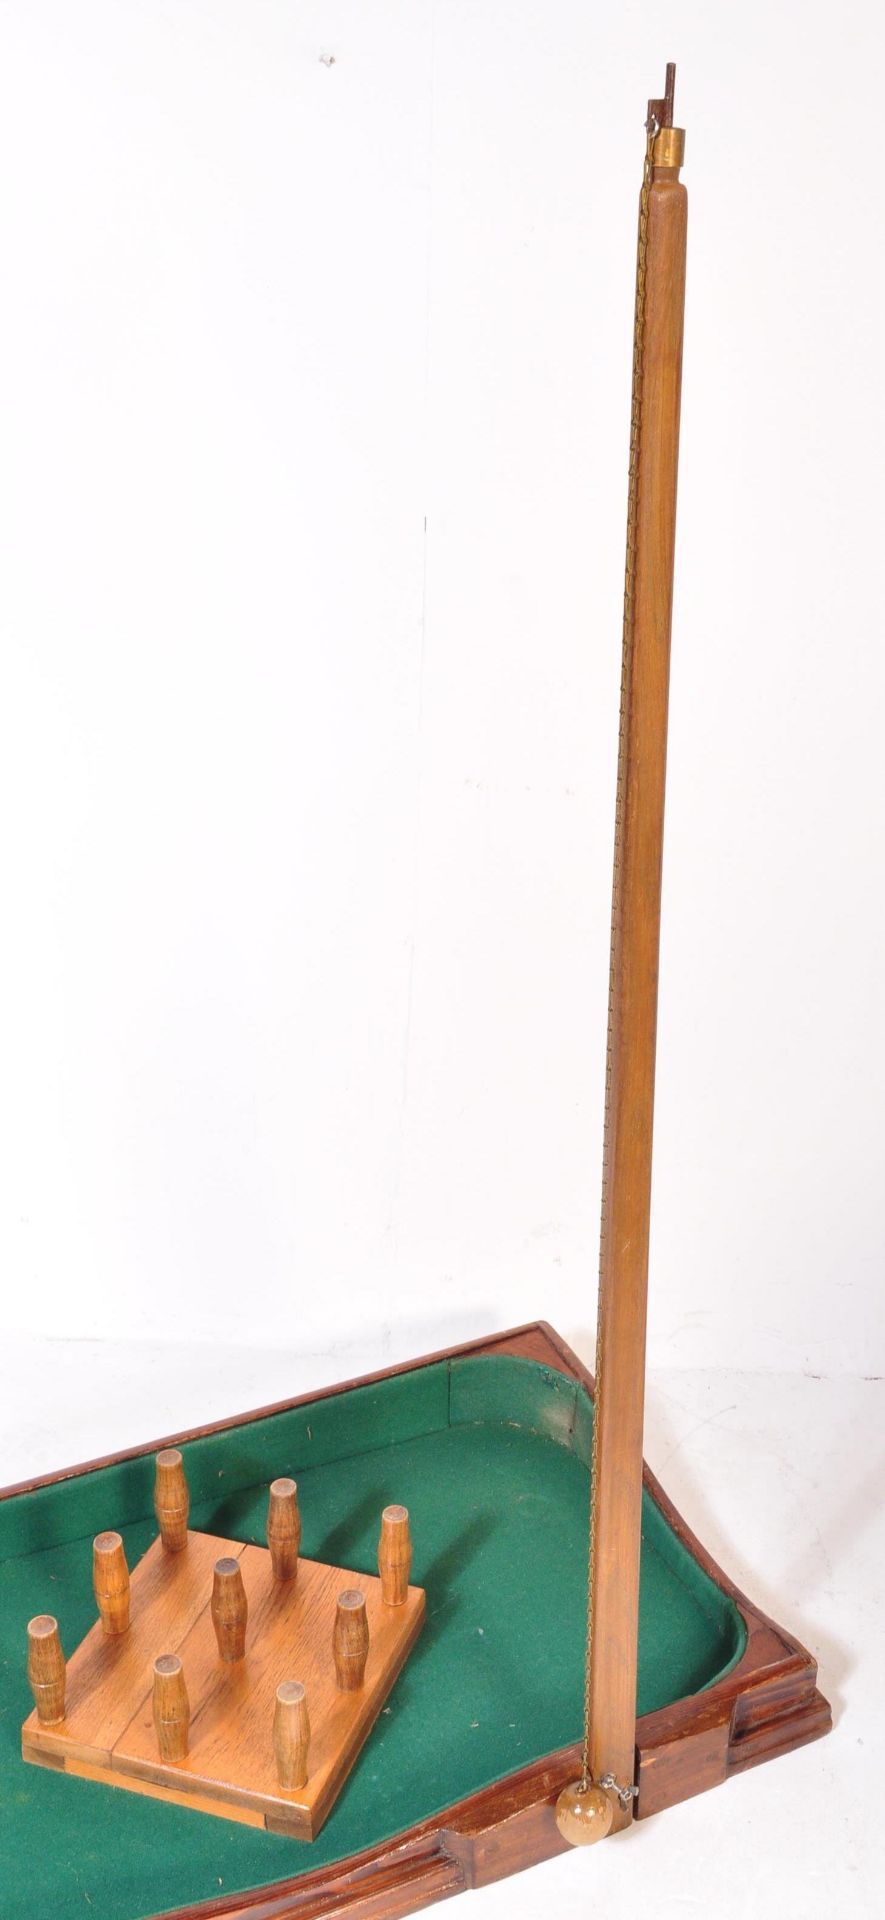 EARLY 20TH CENTURY MAHOGANY TABLE TOP SKITTLES GAME - Image 3 of 6